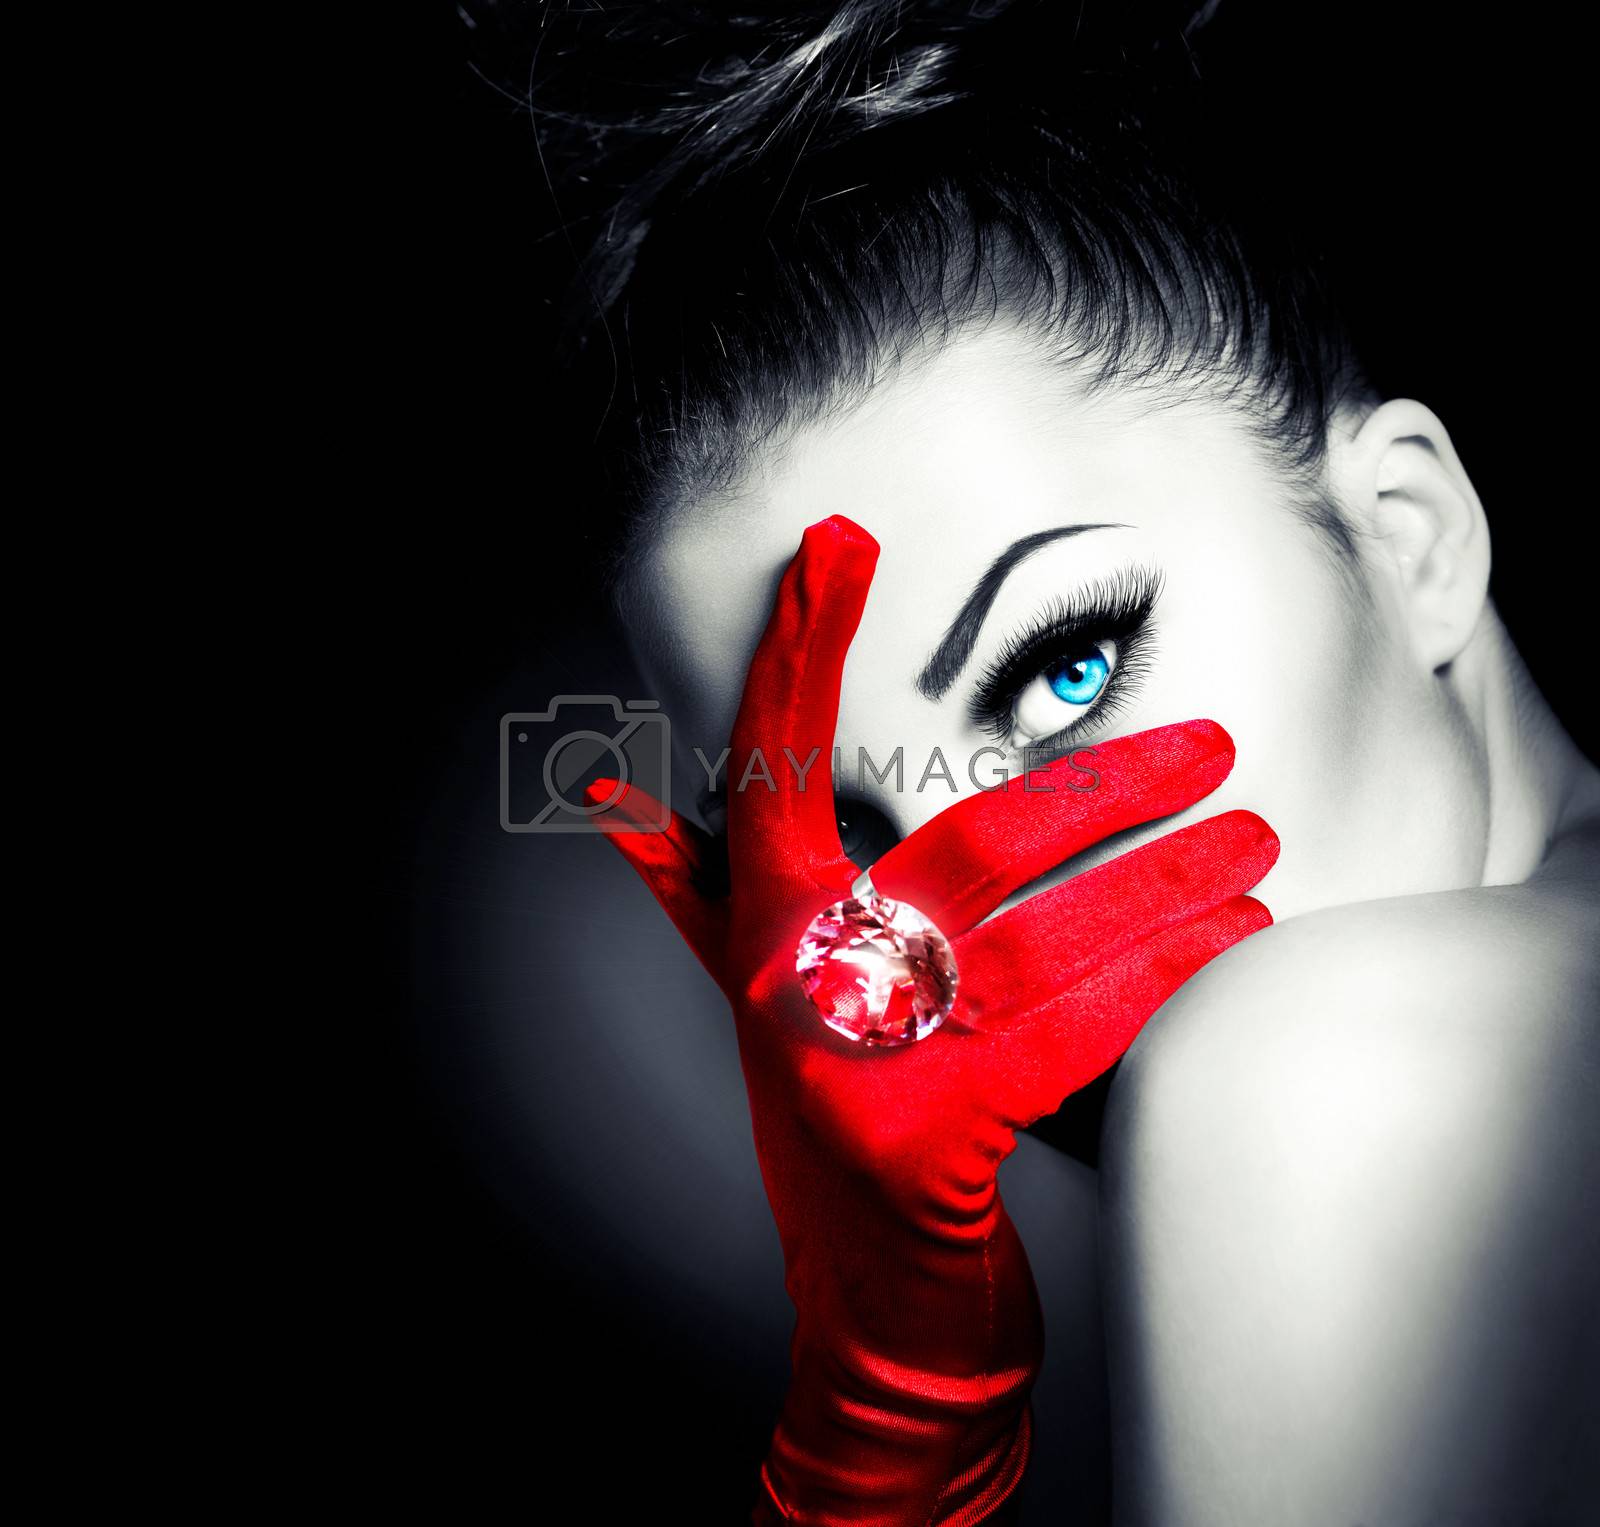 Royalty free image of Vintage Style Mysterious Woman Wearing Red Glamour Gloves  by SubbotinaA